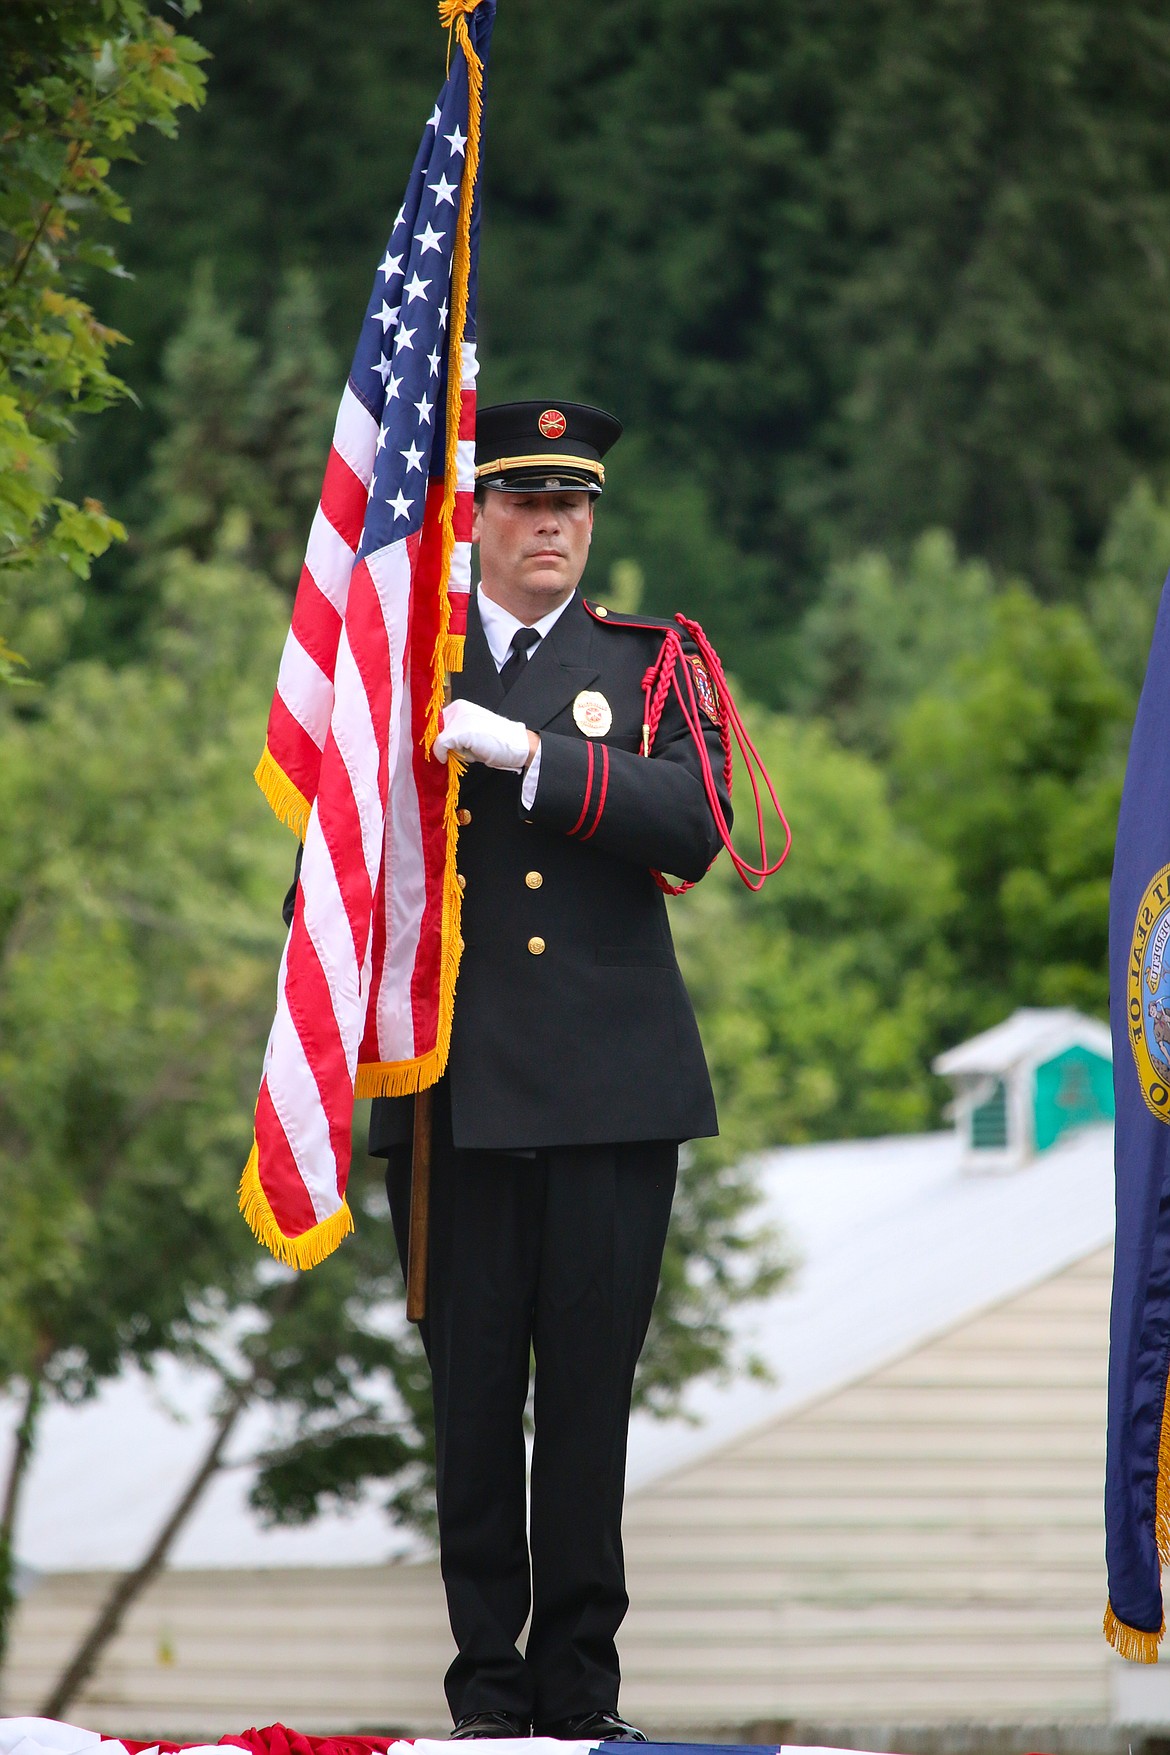 Photo by MANDI BATEMAN
The Boundary County Fire Service Honor Guard during the opening ceremonies of the Fourth of July celebration.